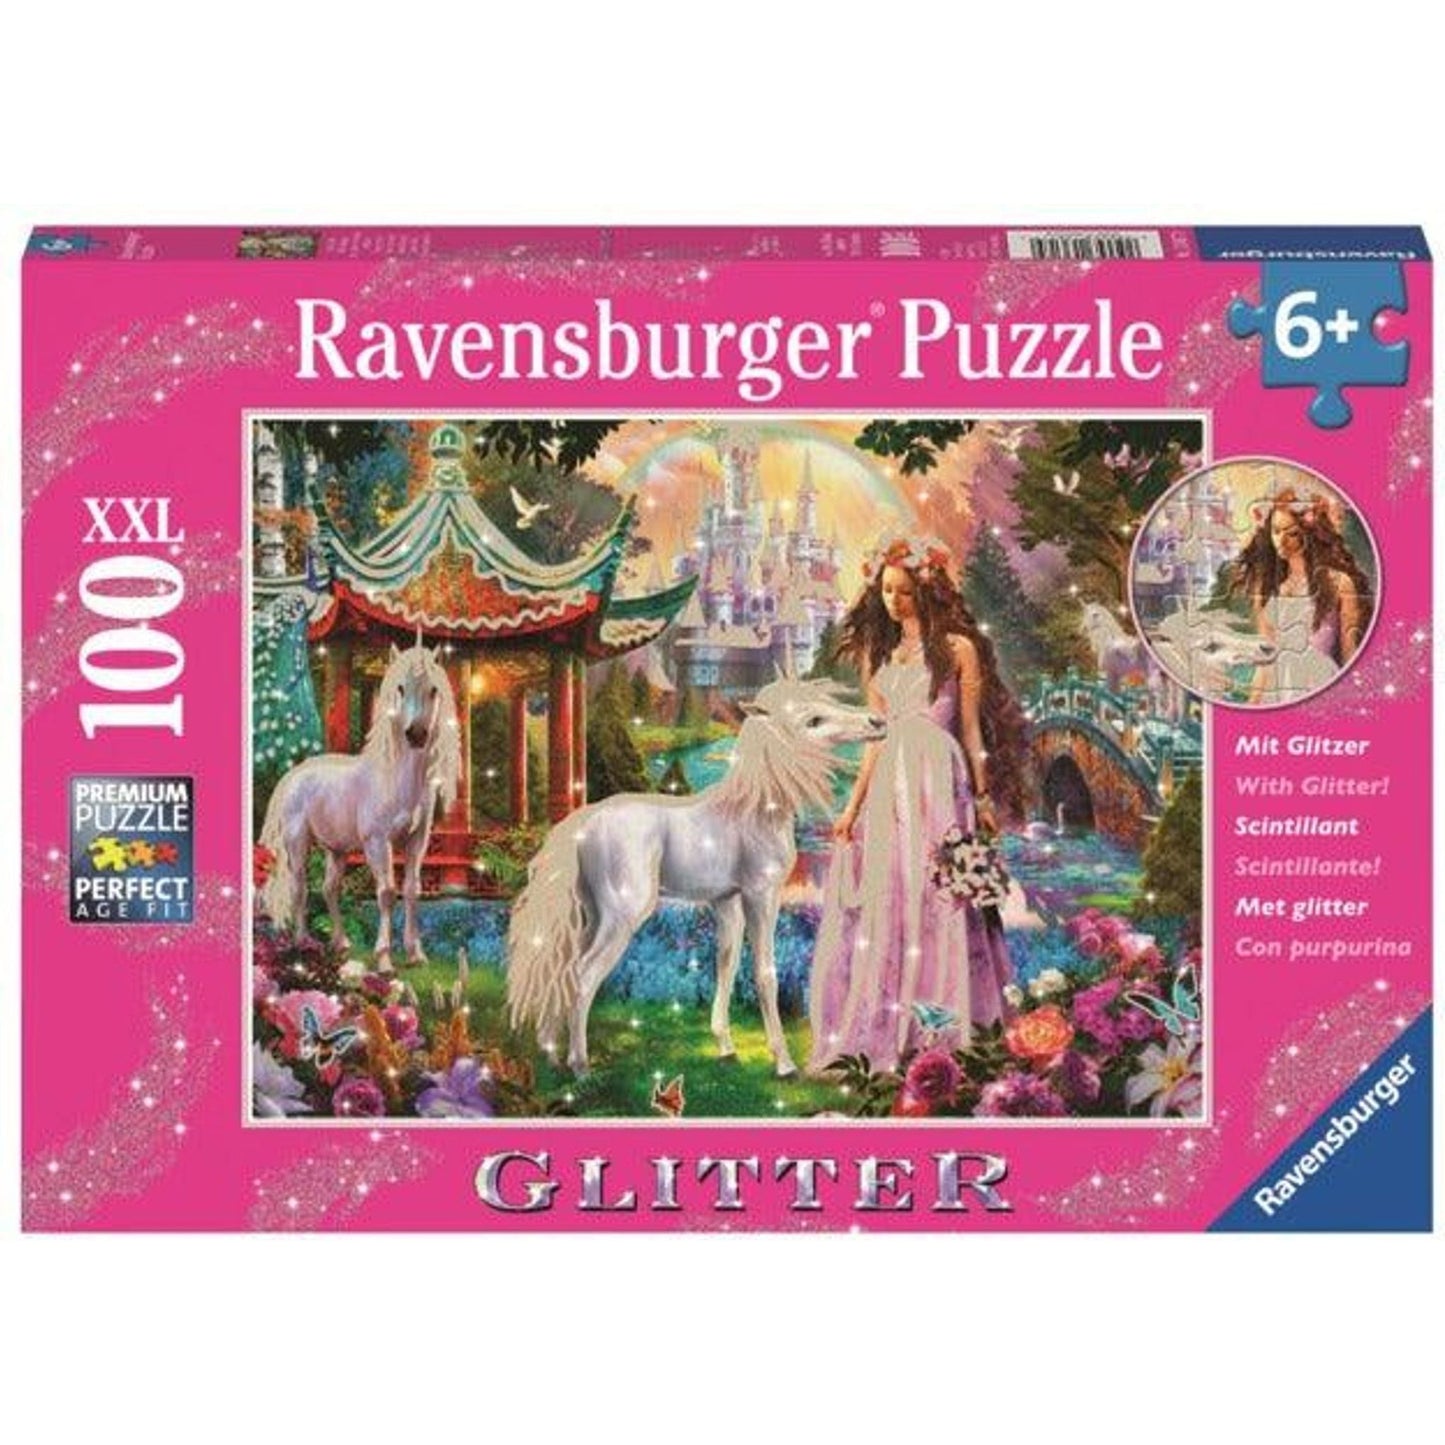 Ravensburger - Glittery Princess with Unicorn Puzzle - 100 Pieces - Toybox Tales